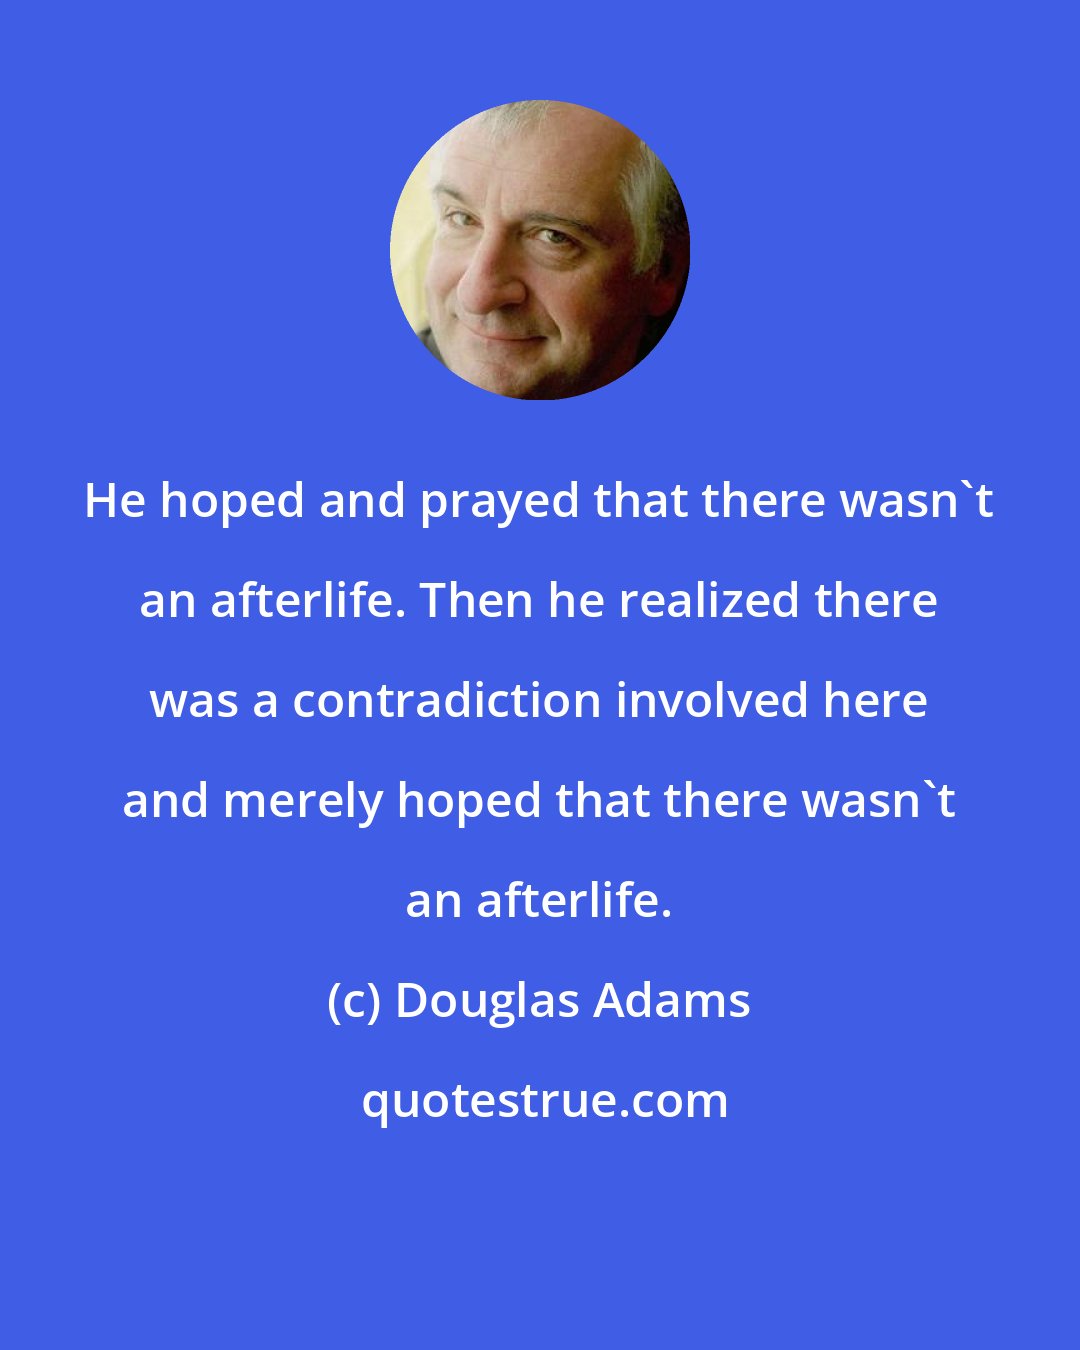 Douglas Adams: He hoped and prayed that there wasn't an afterlife. Then he realized there was a contradiction involved here and merely hoped that there wasn't an afterlife.